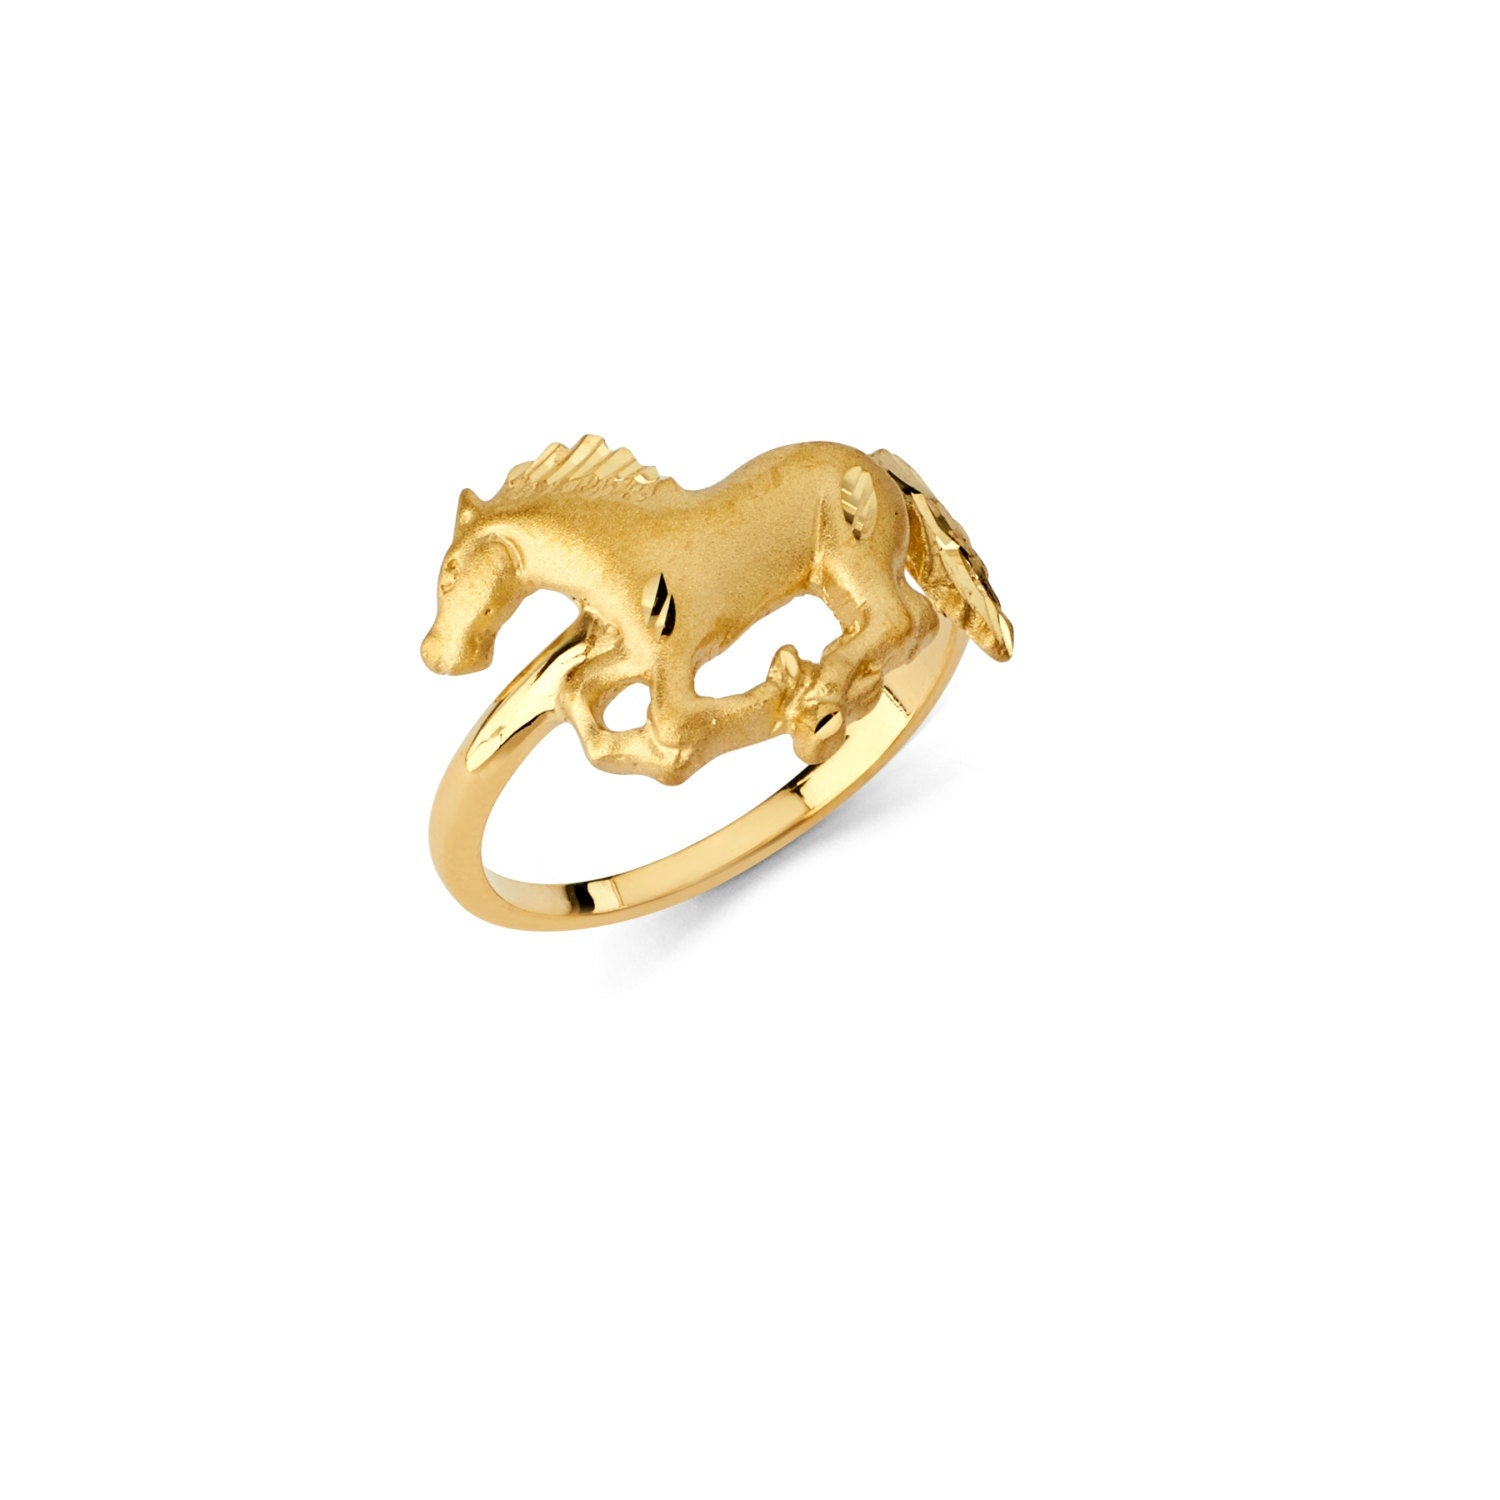 Solid 14K Yellow Gold Running Horse Ring